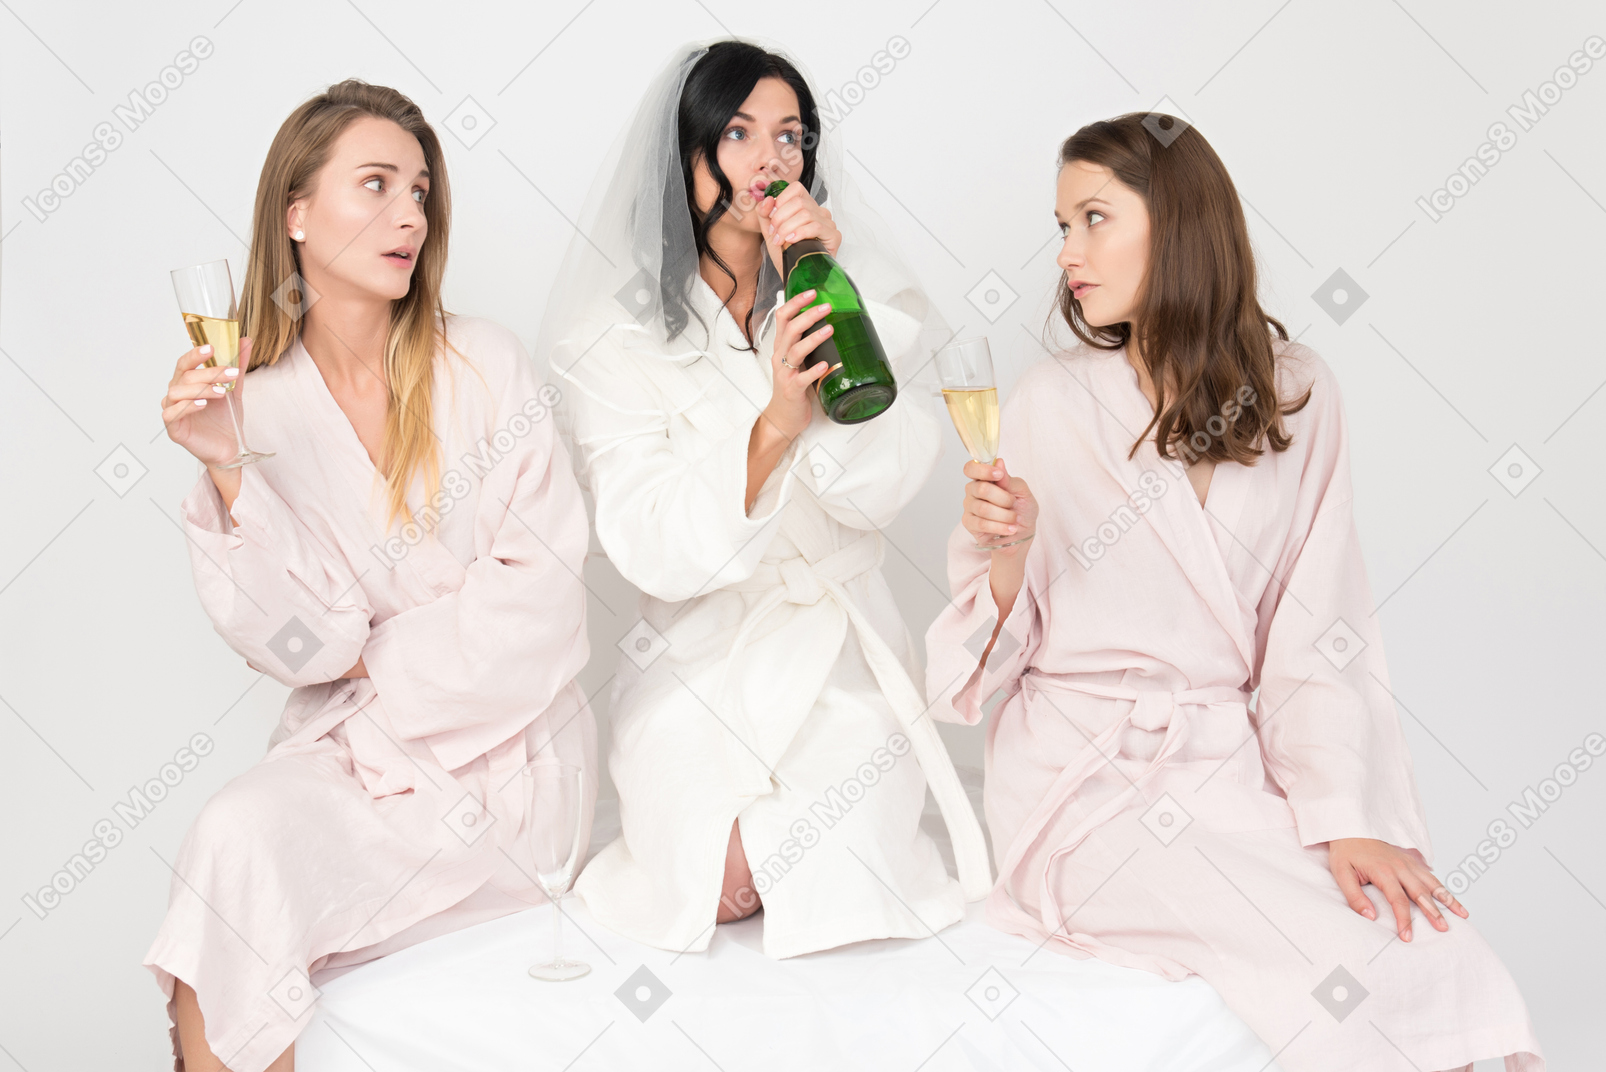 Bridesmaids drinking champagne and bride drinking directly from the bottle